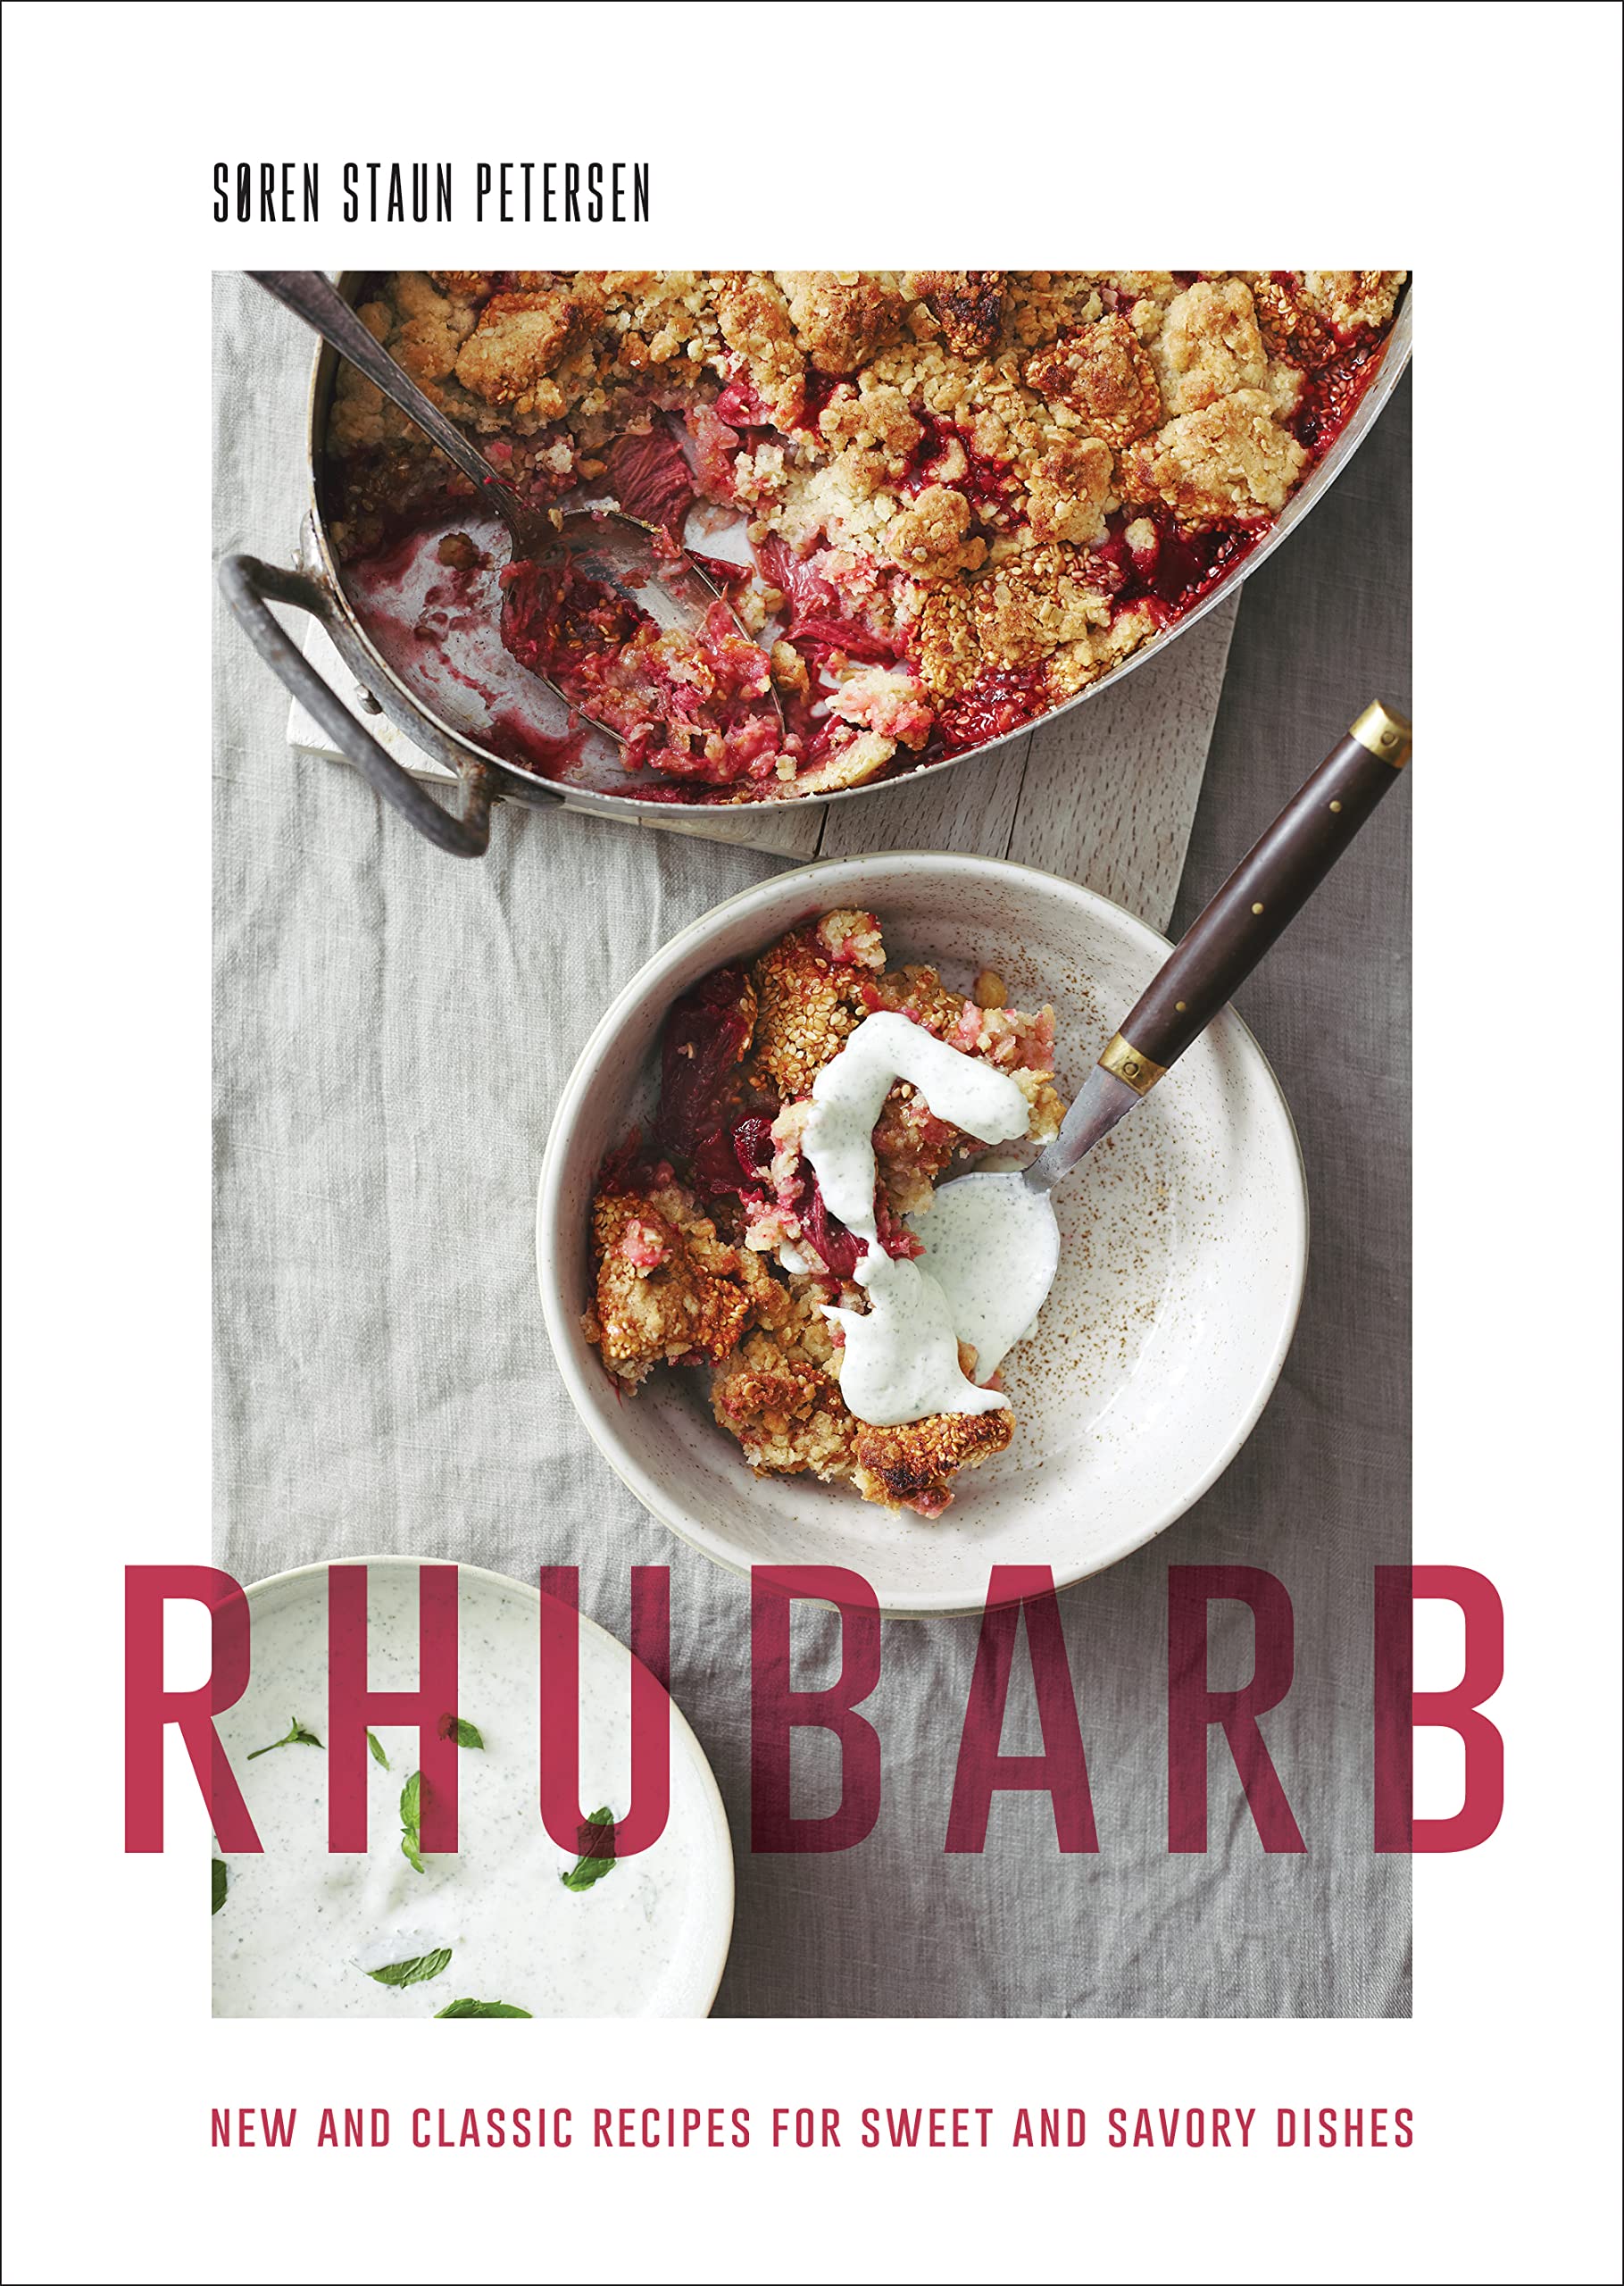 Rhubarb: New and Classic Recipes for Sweet and Savory Dishes (Søren Staun Petersen)